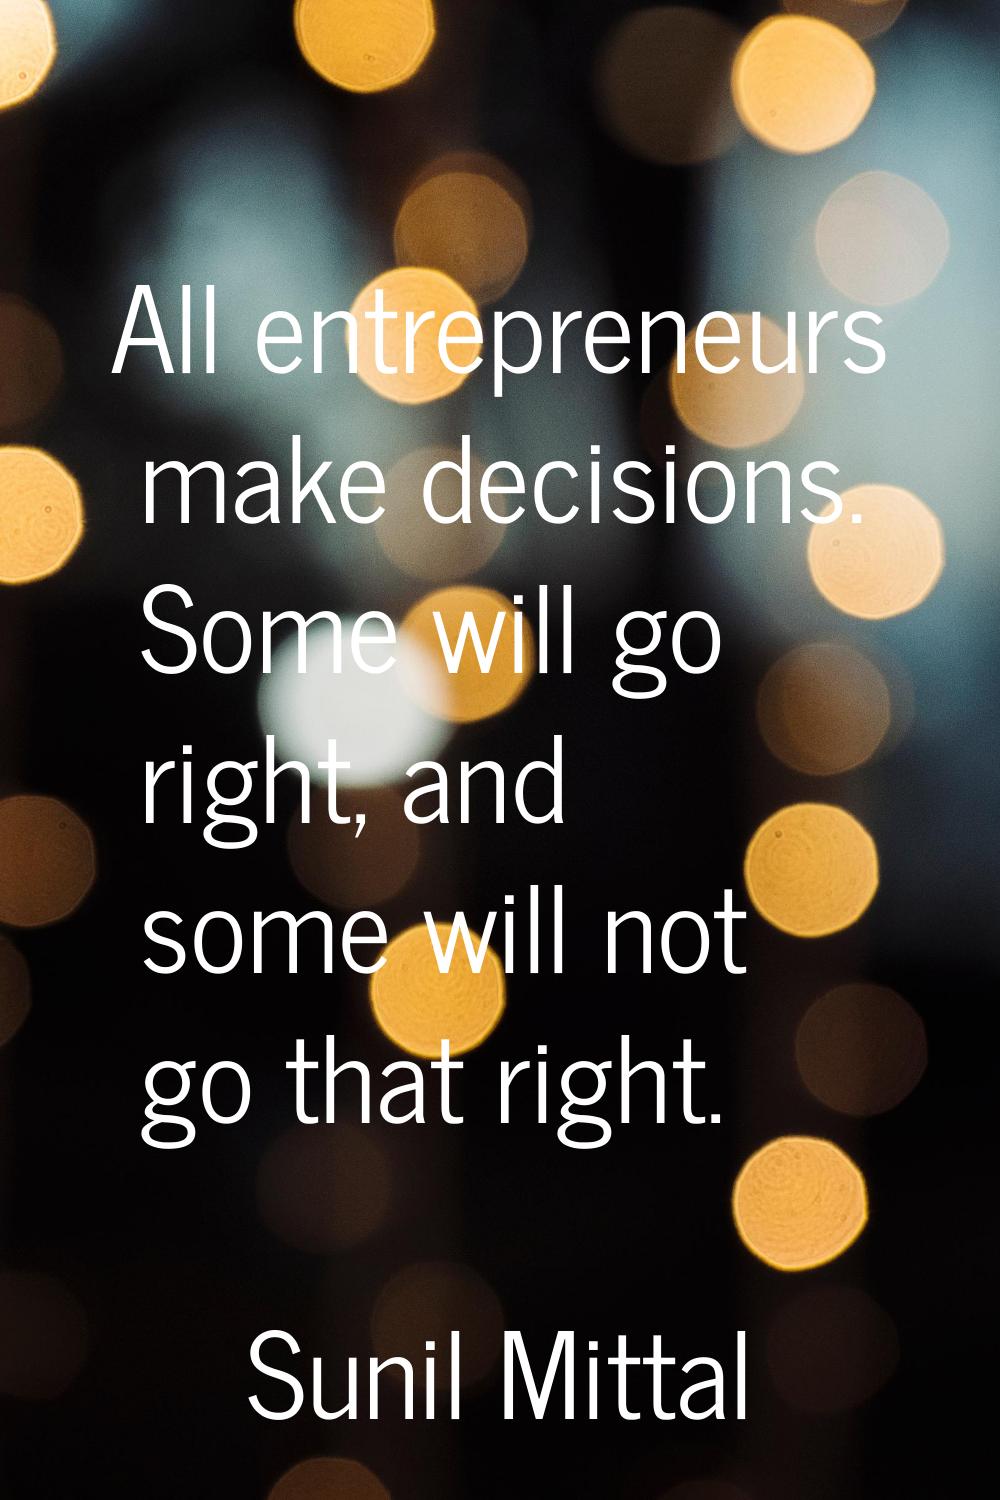 All entrepreneurs make decisions. Some will go right, and some will not go that right.